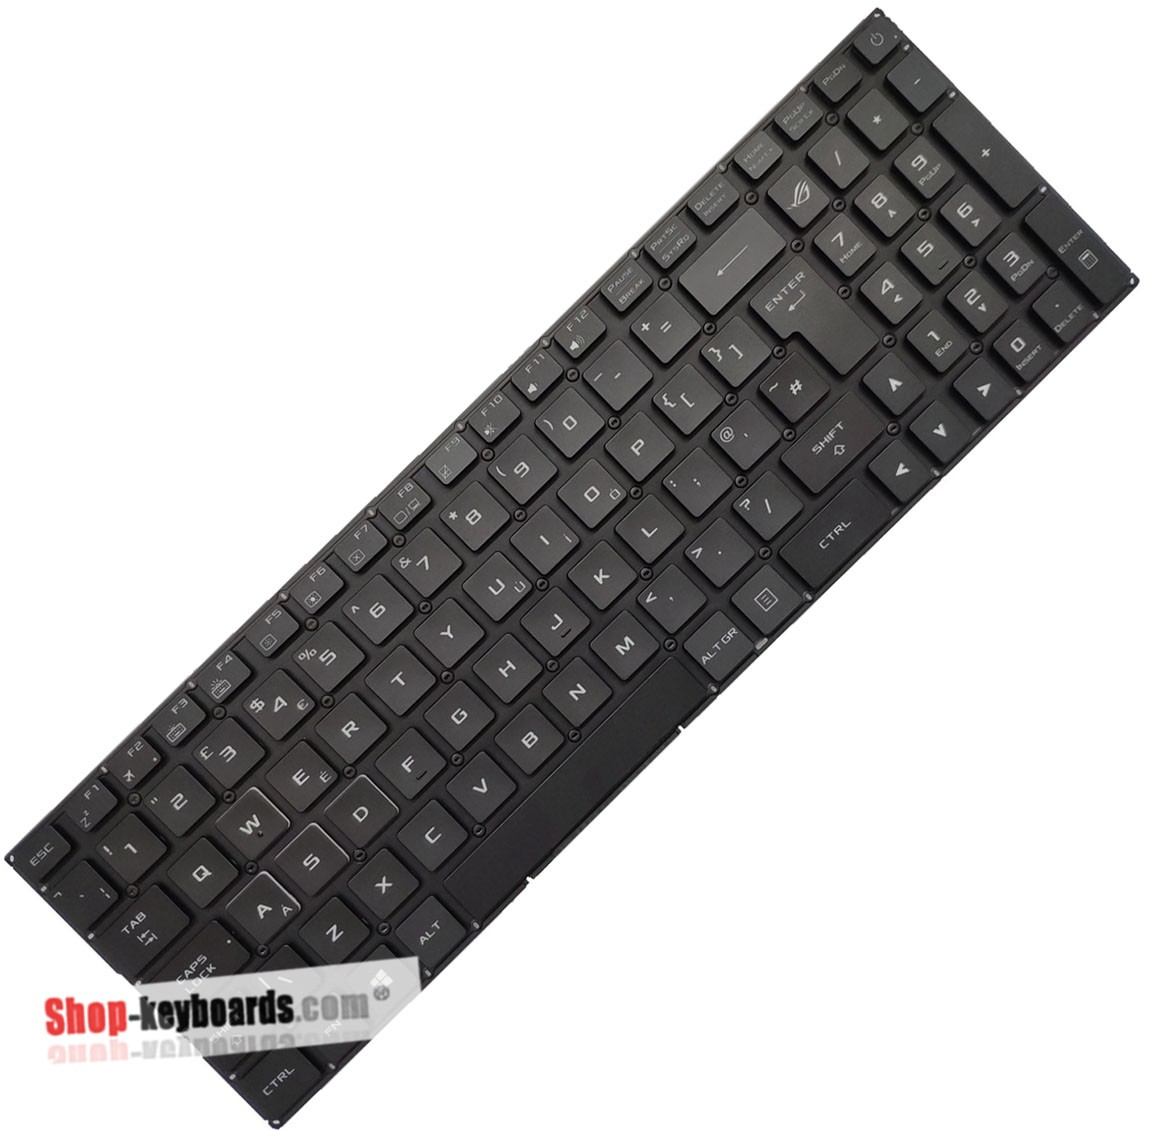 Asus 0KNB0-6618ND00 Keyboard replacement